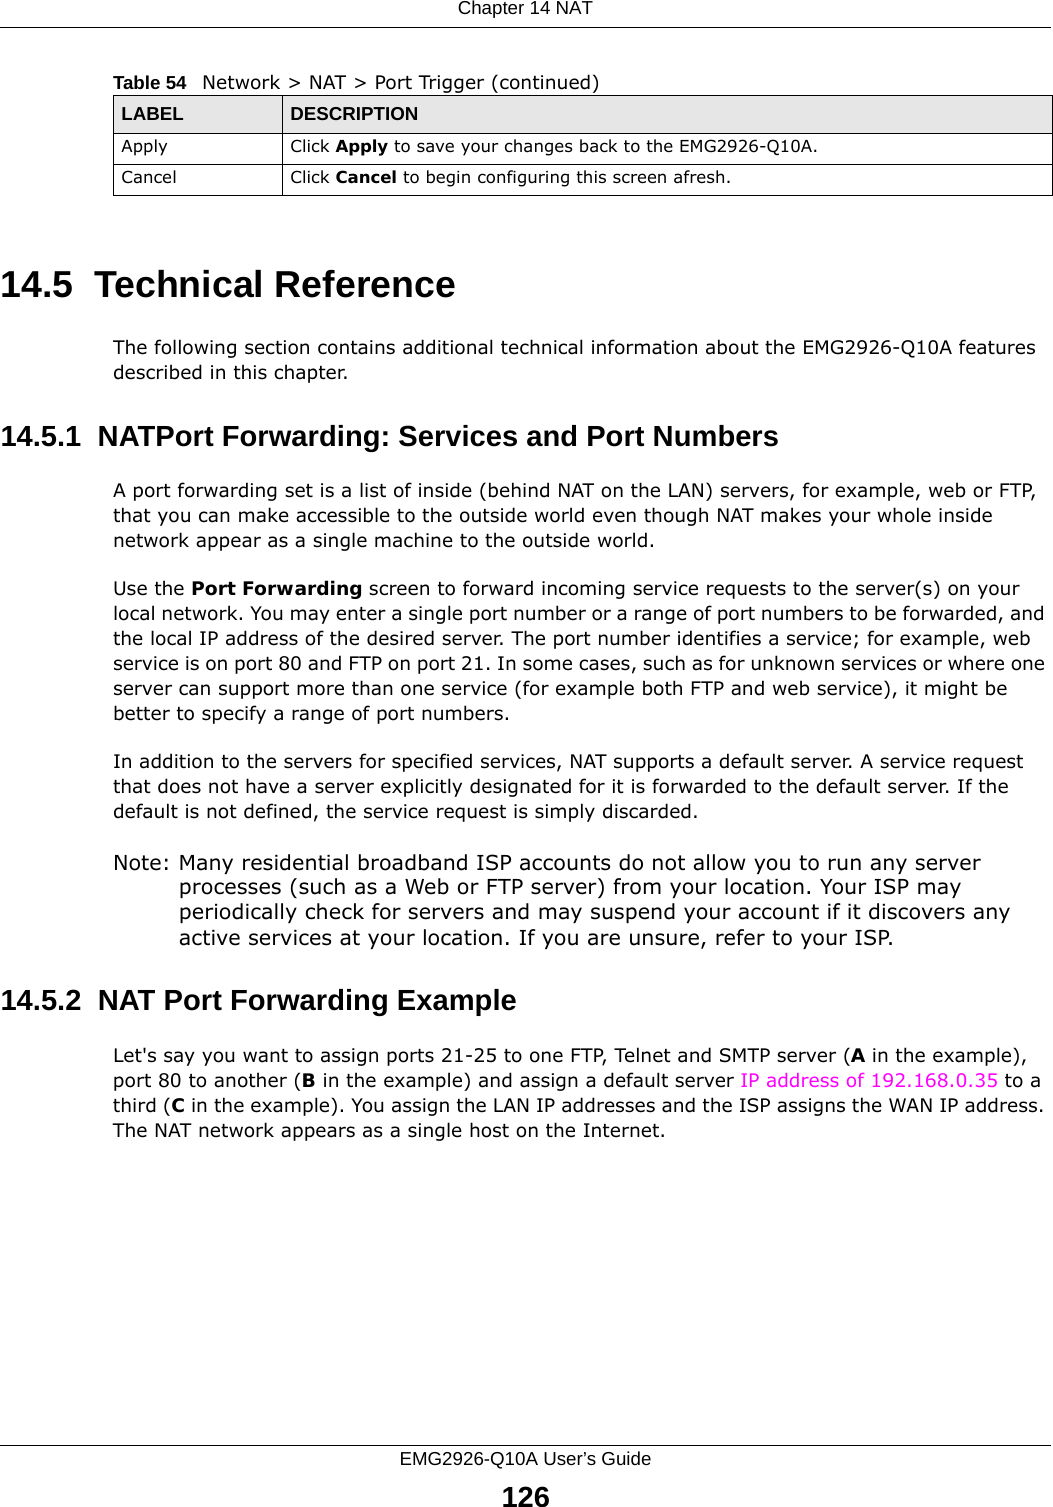 Chapter 14 NATEMG2926-Q10A User’s Guide12614.5  Technical ReferenceThe following section contains additional technical information about the EMG2926-Q10A features described in this chapter.14.5.1  NATPort Forwarding: Services and Port NumbersA port forwarding set is a list of inside (behind NAT on the LAN) servers, for example, web or FTP, that you can make accessible to the outside world even though NAT makes your whole inside network appear as a single machine to the outside world. Use the Port Forwarding screen to forward incoming service requests to the server(s) on your local network. You may enter a single port number or a range of port numbers to be forwarded, and the local IP address of the desired server. The port number identifies a service; for example, web service is on port 80 and FTP on port 21. In some cases, such as for unknown services or where one server can support more than one service (for example both FTP and web service), it might be better to specify a range of port numbers.In addition to the servers for specified services, NAT supports a default server. A service request that does not have a server explicitly designated for it is forwarded to the default server. If the default is not defined, the service request is simply discarded.Note: Many residential broadband ISP accounts do not allow you to run any server processes (such as a Web or FTP server) from your location. Your ISP may periodically check for servers and may suspend your account if it discovers any active services at your location. If you are unsure, refer to your ISP.14.5.2  NAT Port Forwarding ExampleLet&apos;s say you want to assign ports 21-25 to one FTP, Telnet and SMTP server (A in the example), port 80 to another (B in the example) and assign a default server IP address of 192.168.0.35 to a third (C in the example). You assign the LAN IP addresses and the ISP assigns the WAN IP address. The NAT network appears as a single host on the Internet.Apply Click Apply to save your changes back to the EMG2926-Q10A.Cancel Click Cancel to begin configuring this screen afresh.Table 54   Network &gt; NAT &gt; Port Trigger (continued)LABEL DESCRIPTION